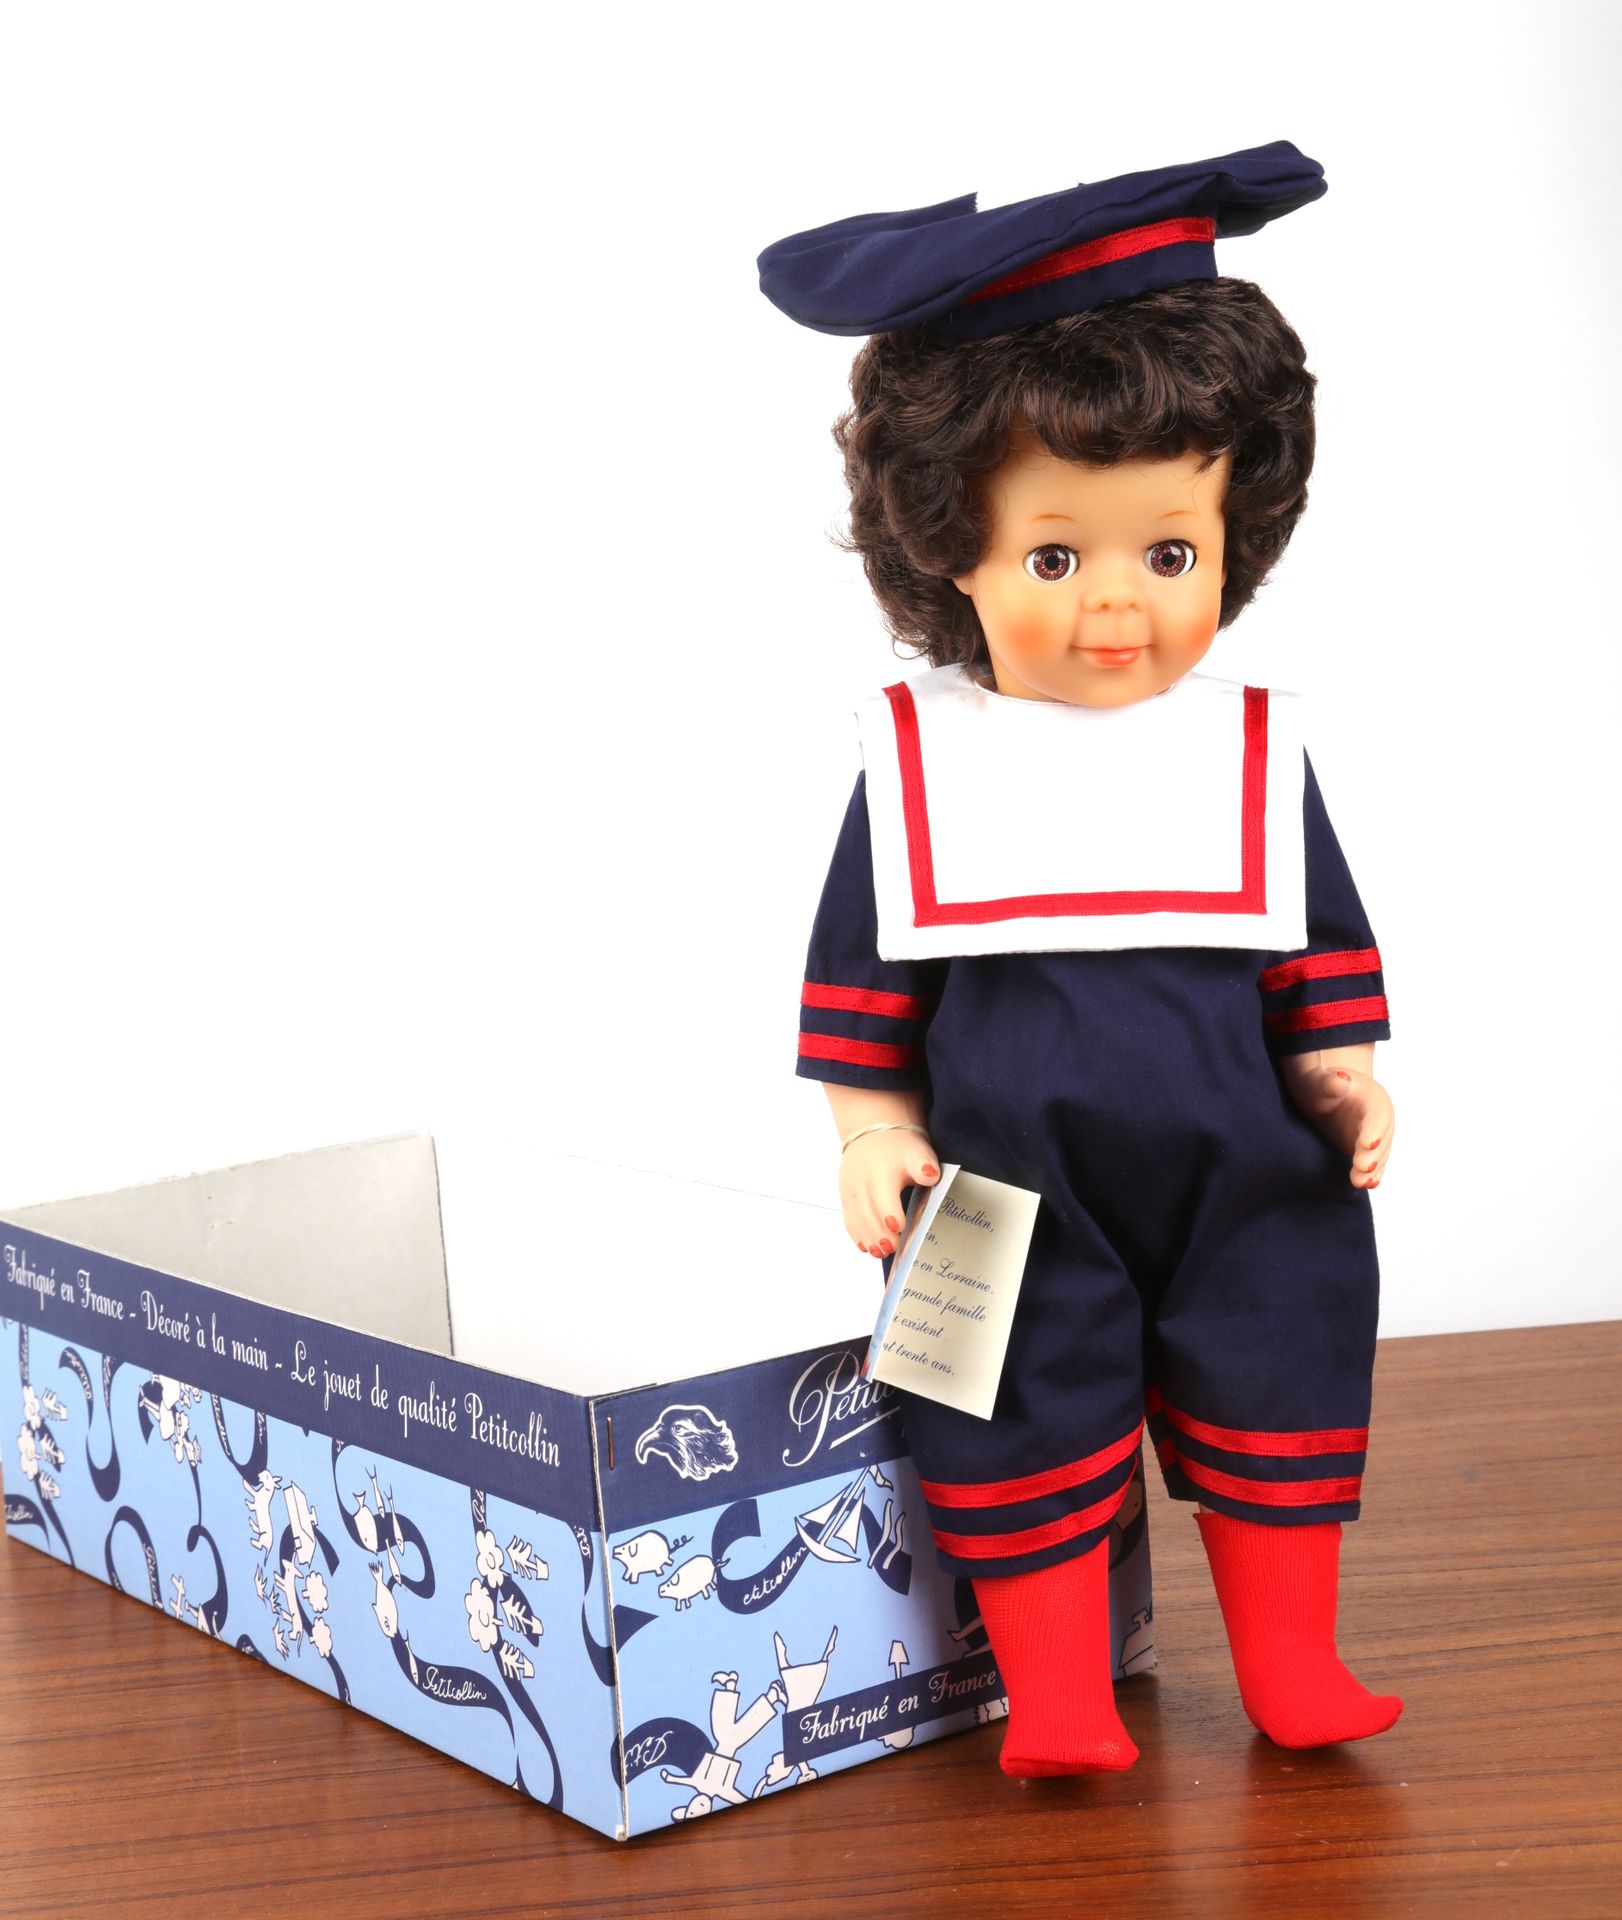 Null PETITCOLLIN, doll dressed as a sailor.